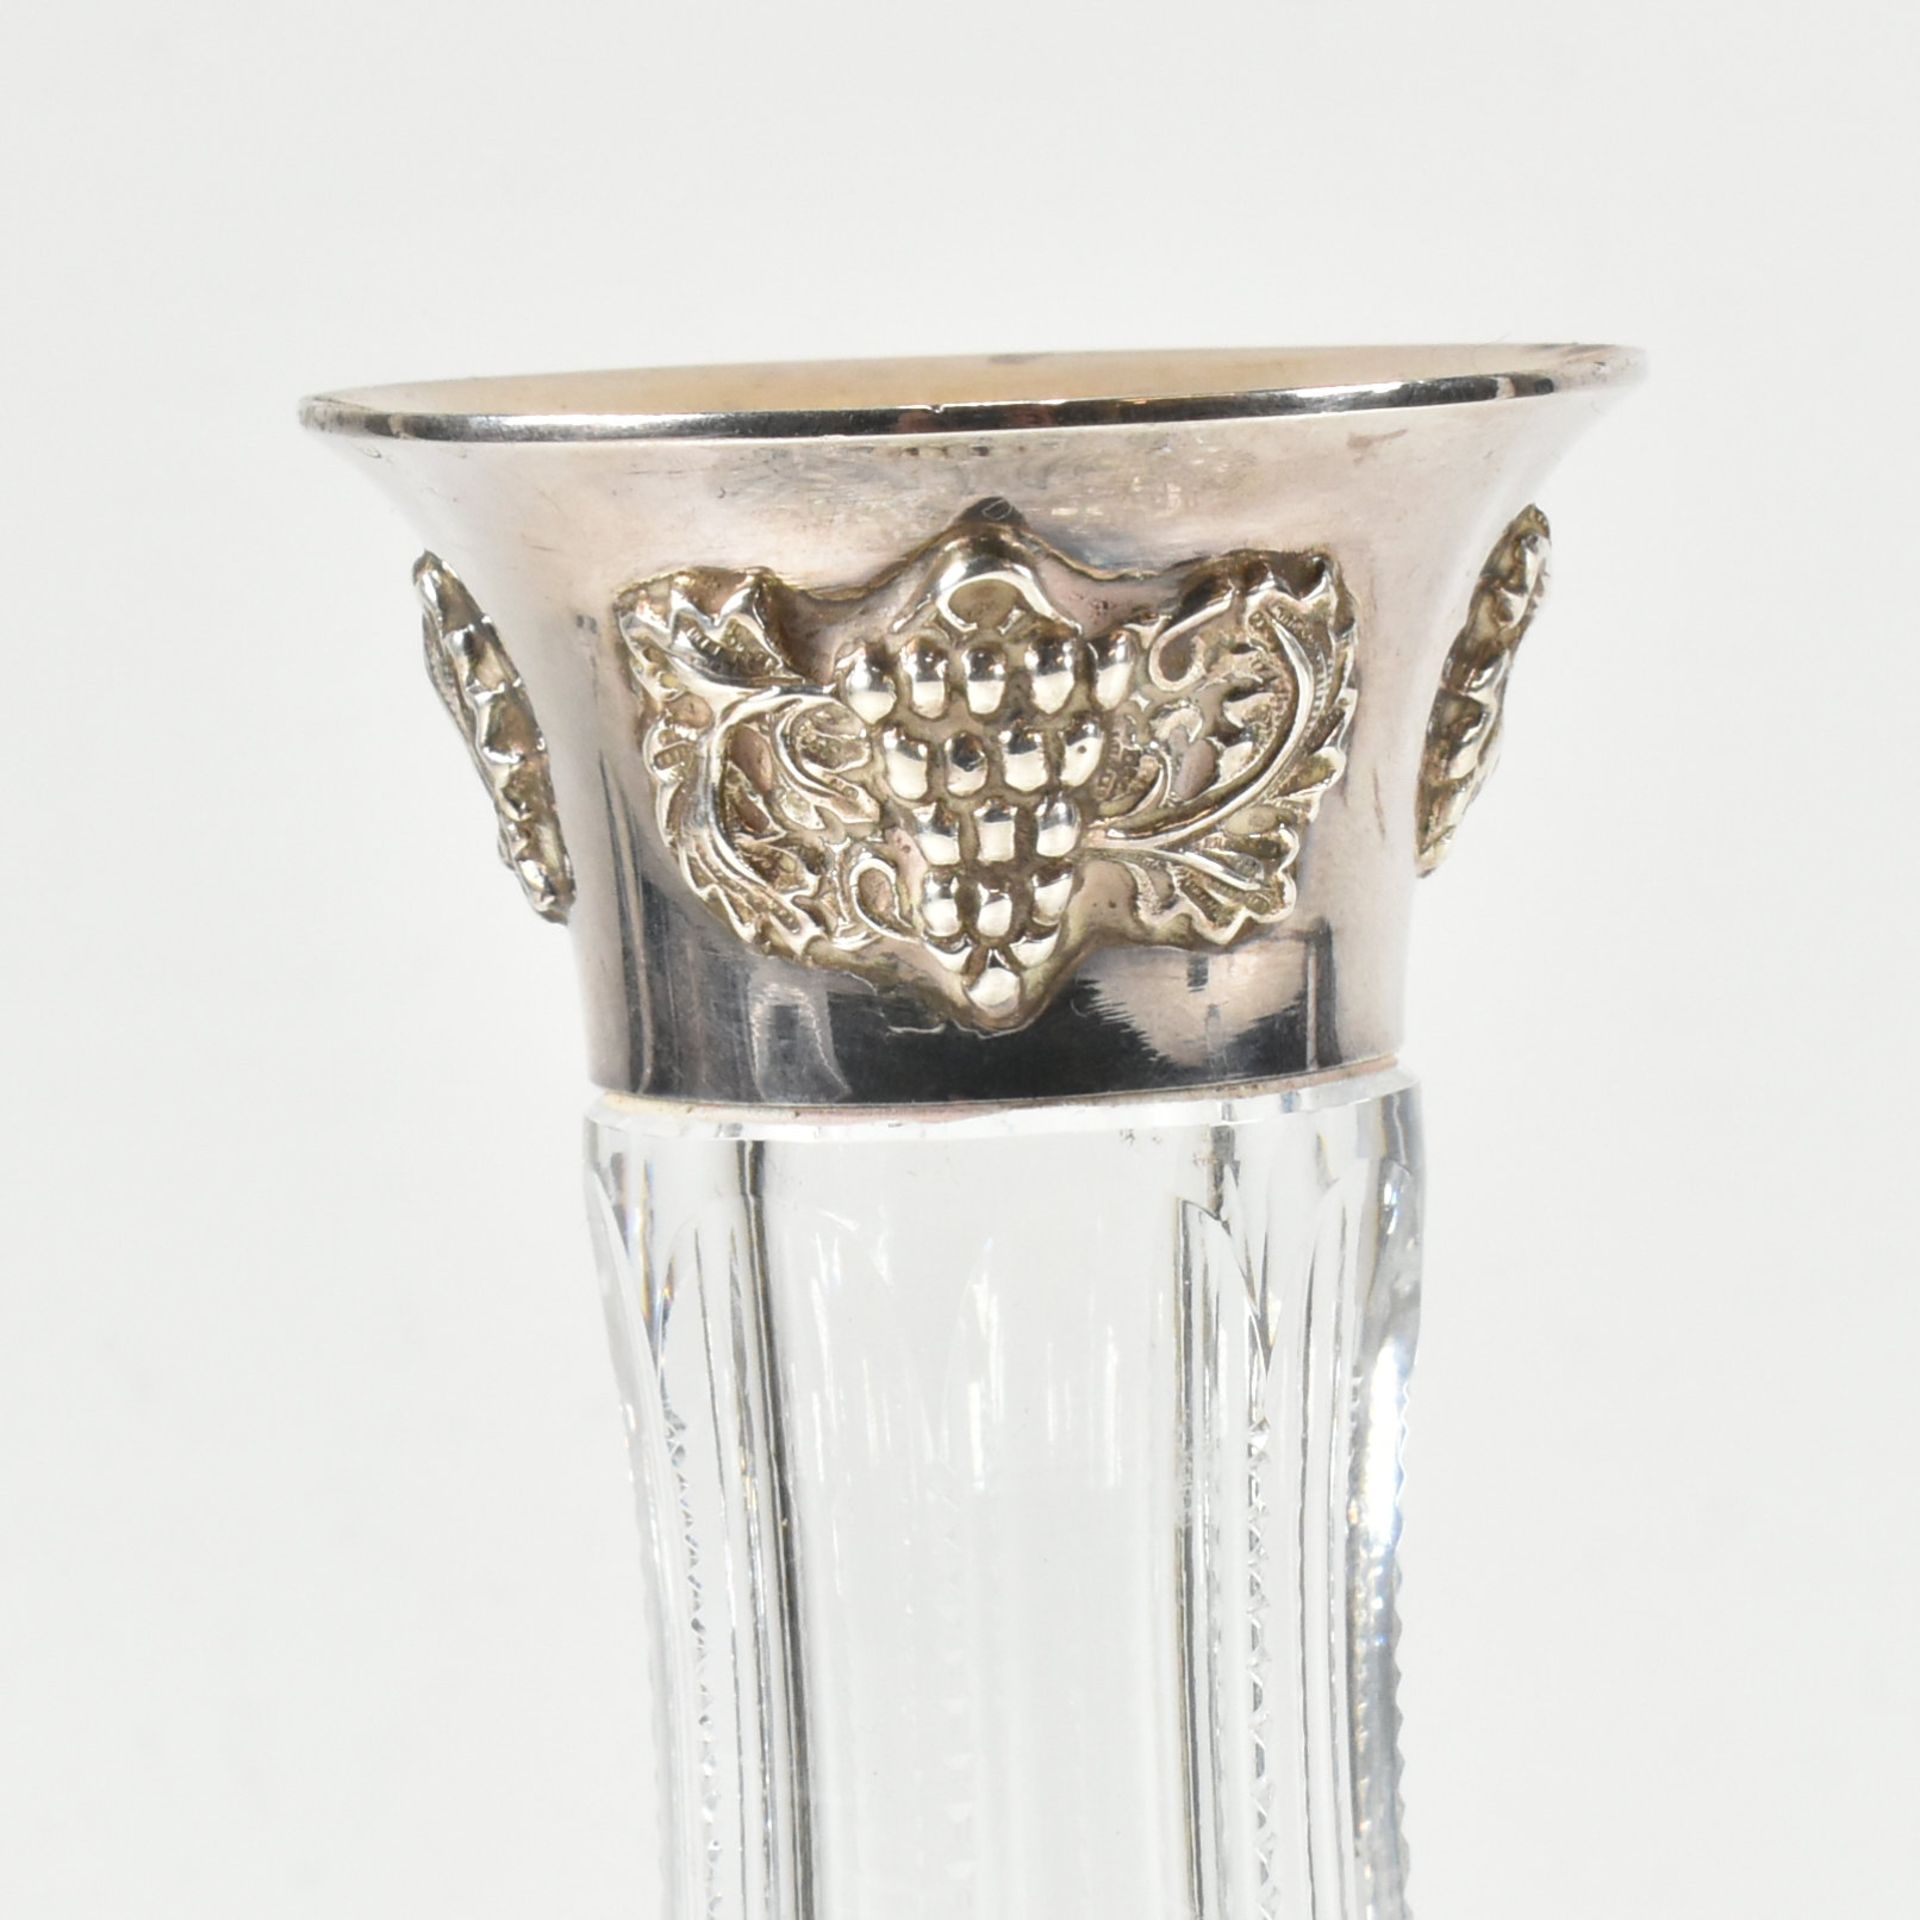 1970S HALLMARKED SILVER MOUNTED CUT GLASS DECANTER - Image 6 of 7